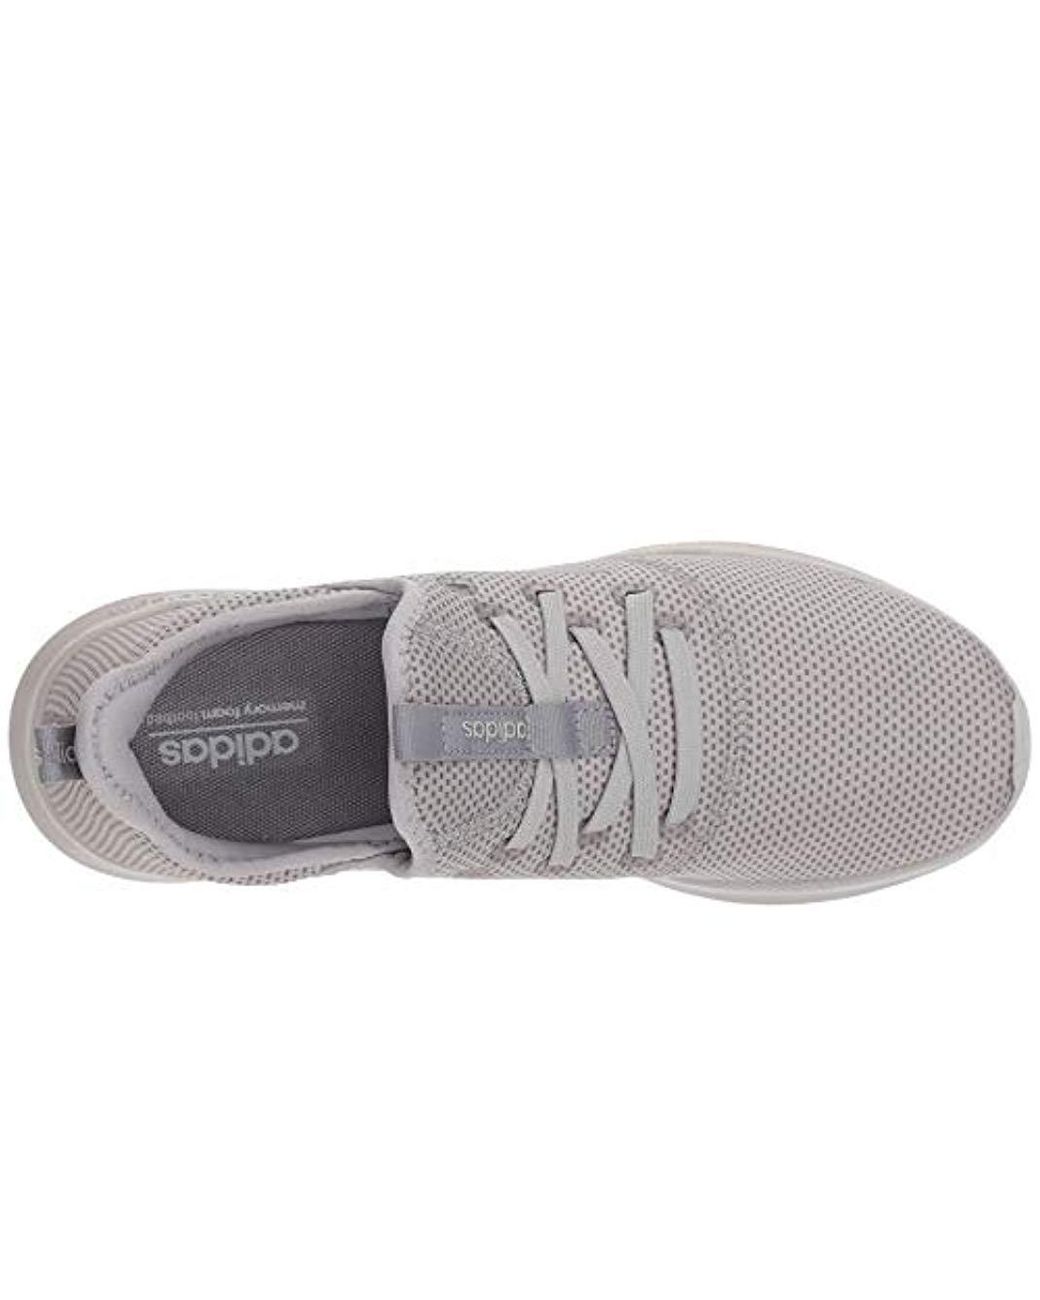 adidas Cloudfoam Pure Running Shoe in Gray | Lyst